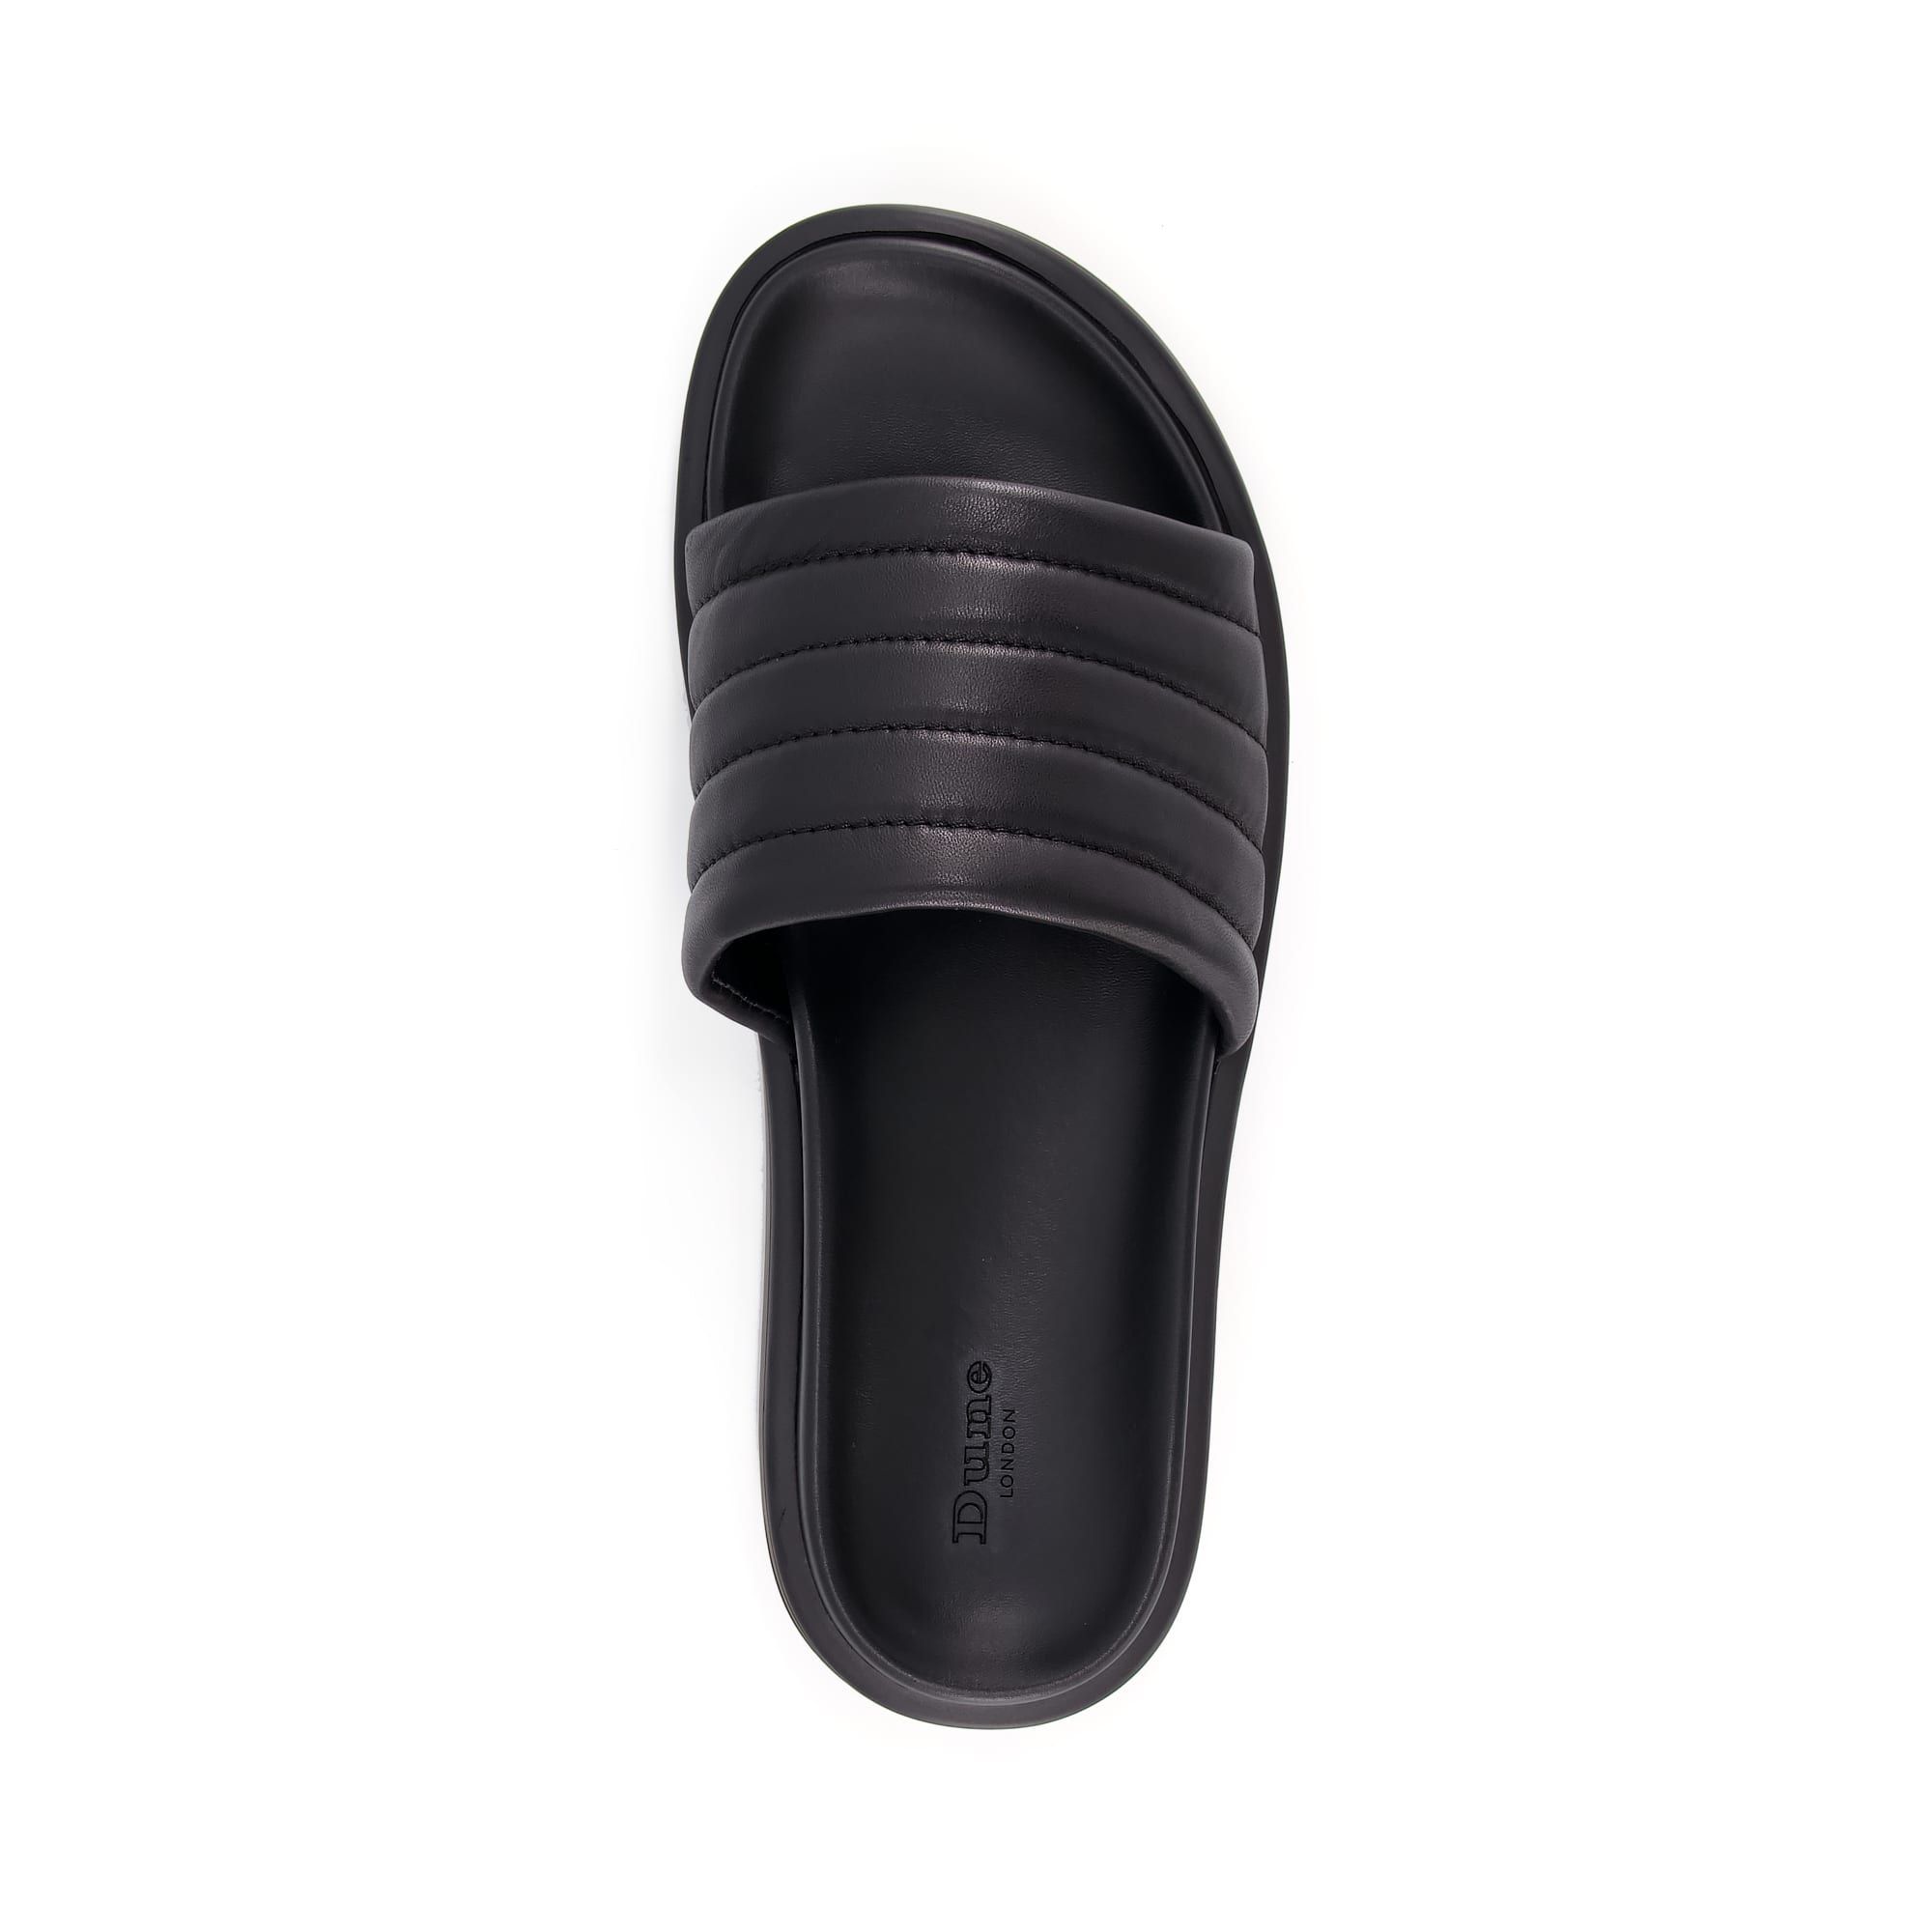 Sun-soaked destinations call for a pair of pool ready sliders. Comfortable and durable this must-have style has been designed in matte leather with padded straps and moulded footbeds.